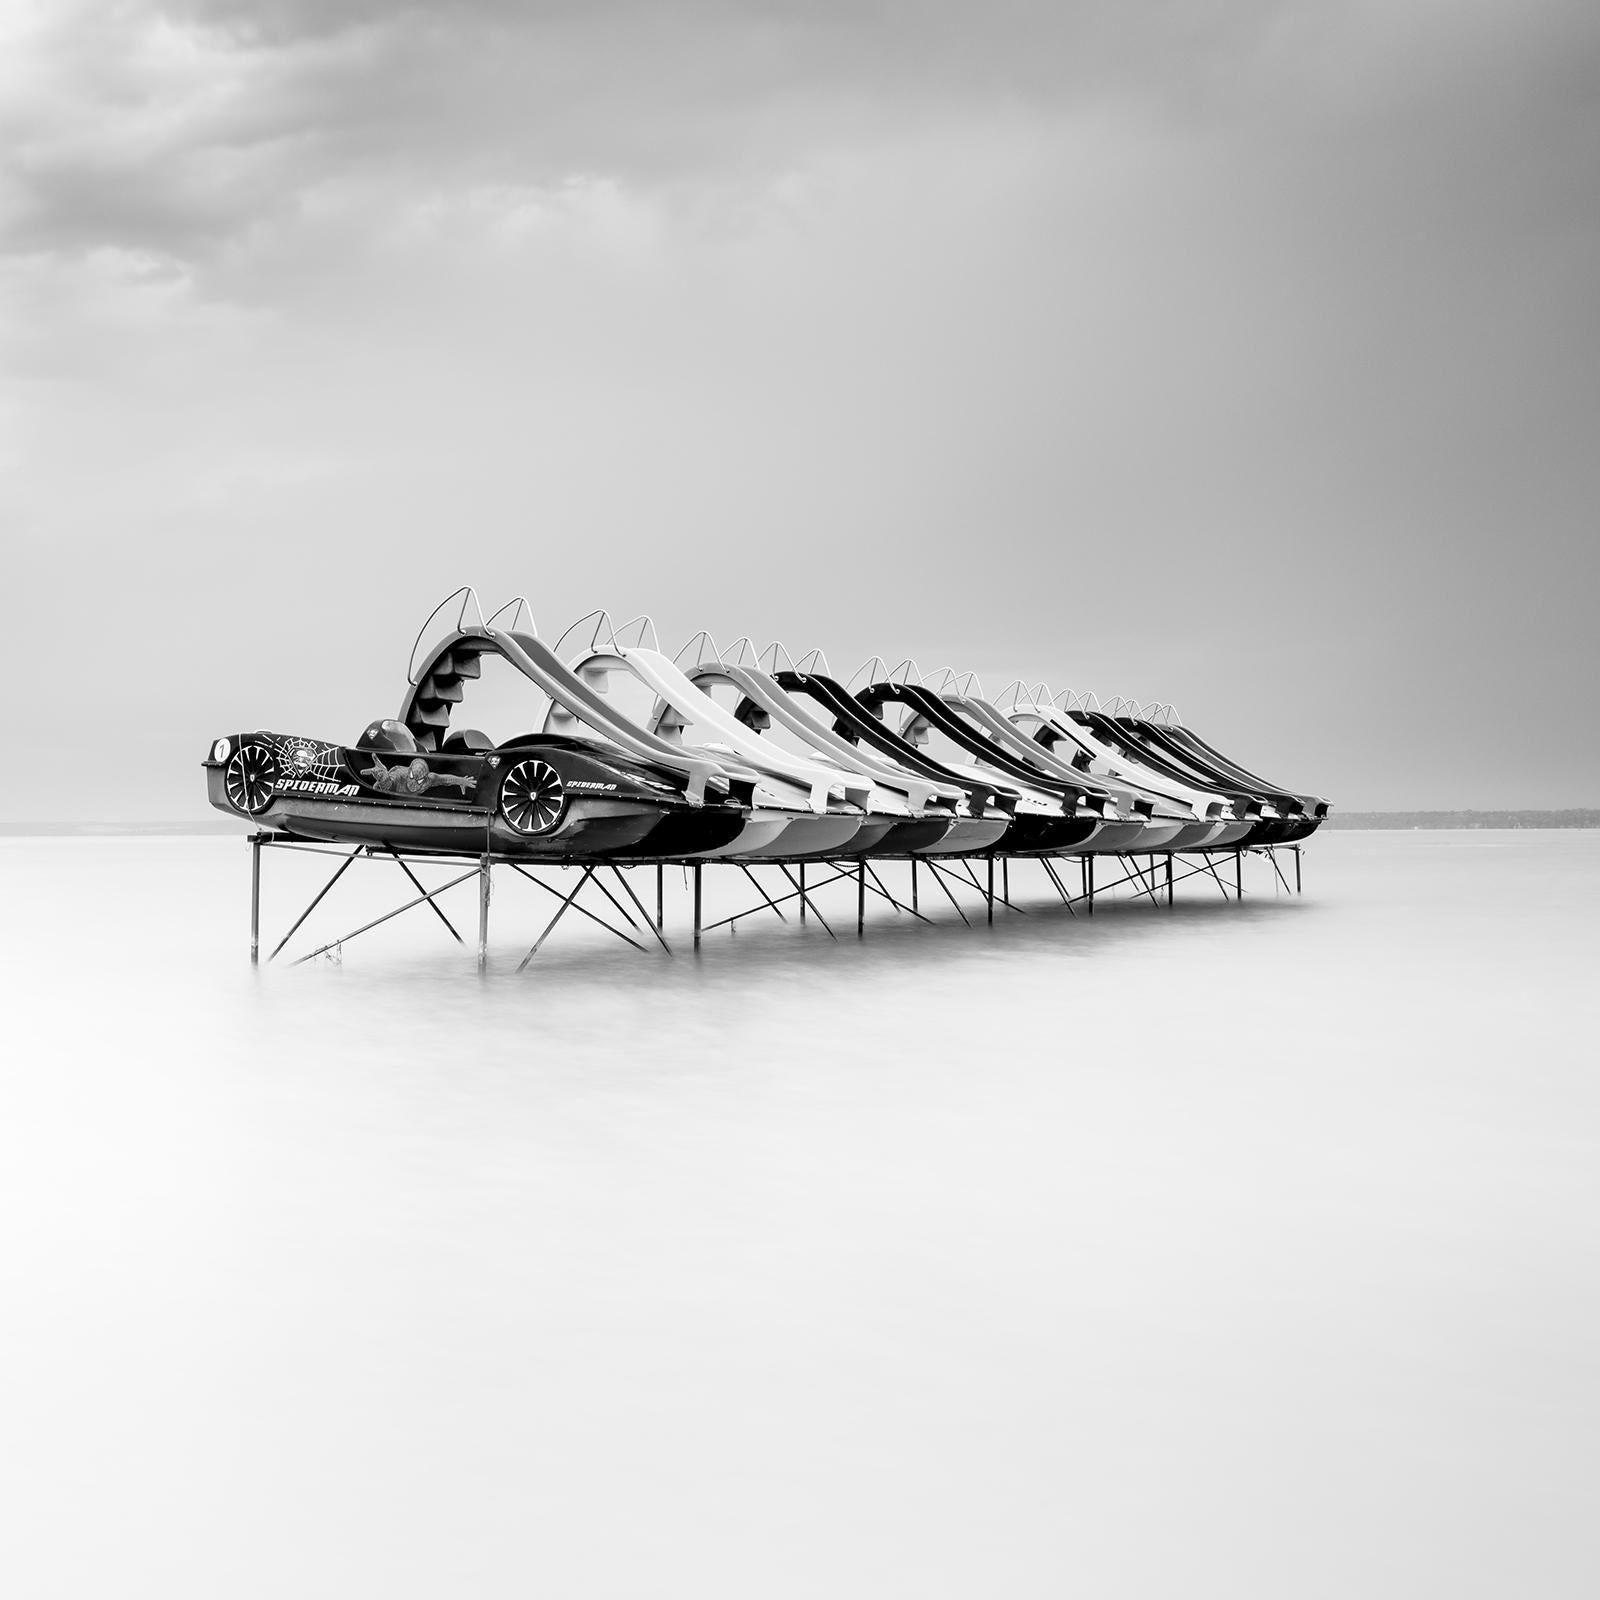 Pedal Boat, storm, Balaton, Hungary, black and white lakescape art photography For Sale 4